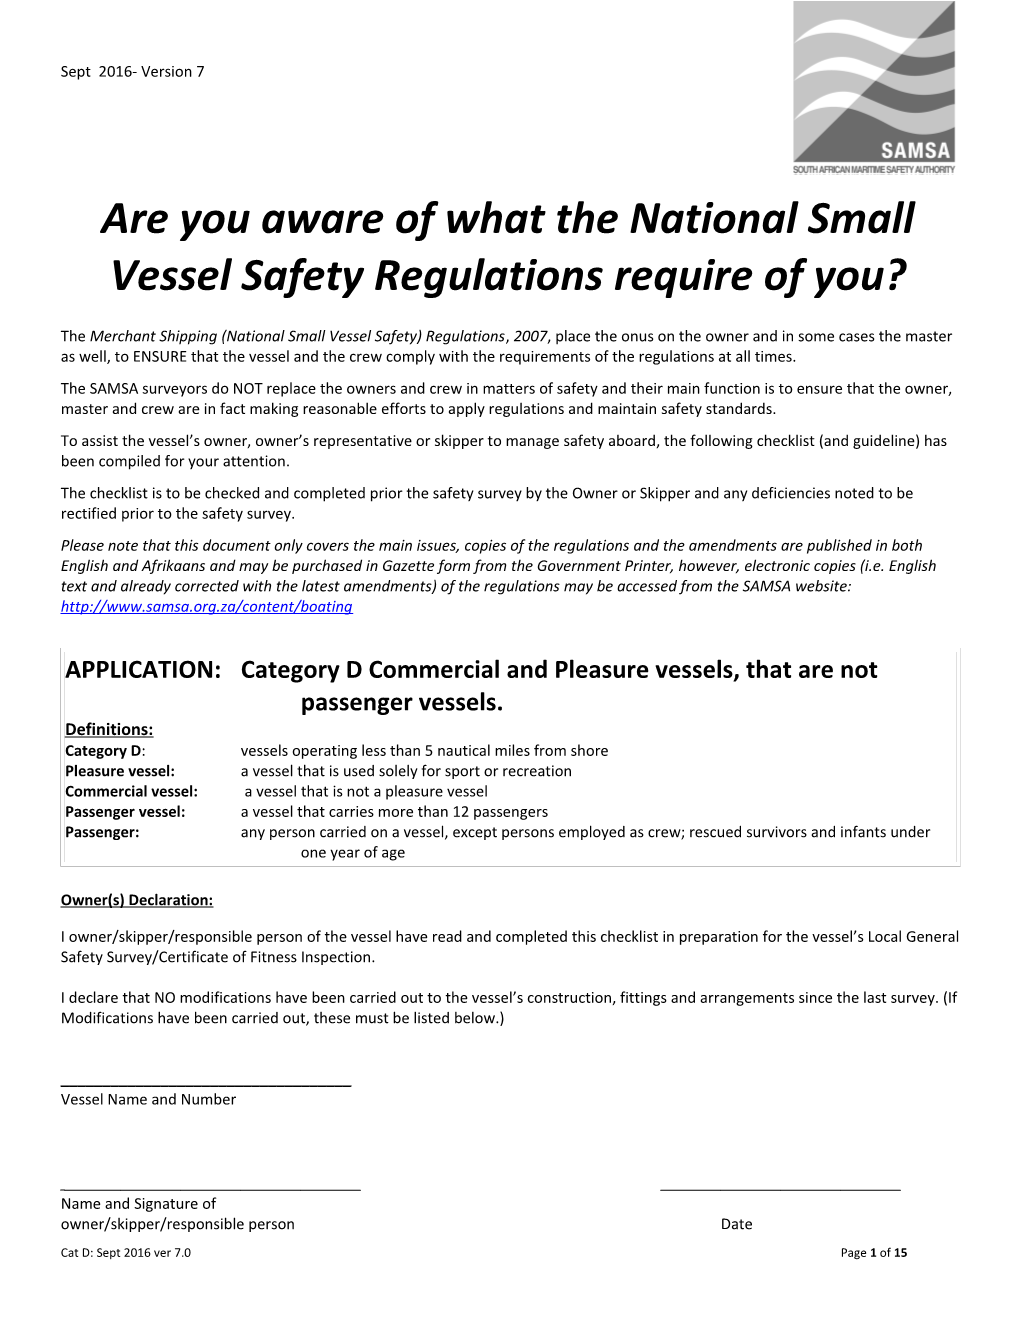 Are You Aware of What the National Small Vessel Safety Regulations Require of You? s1